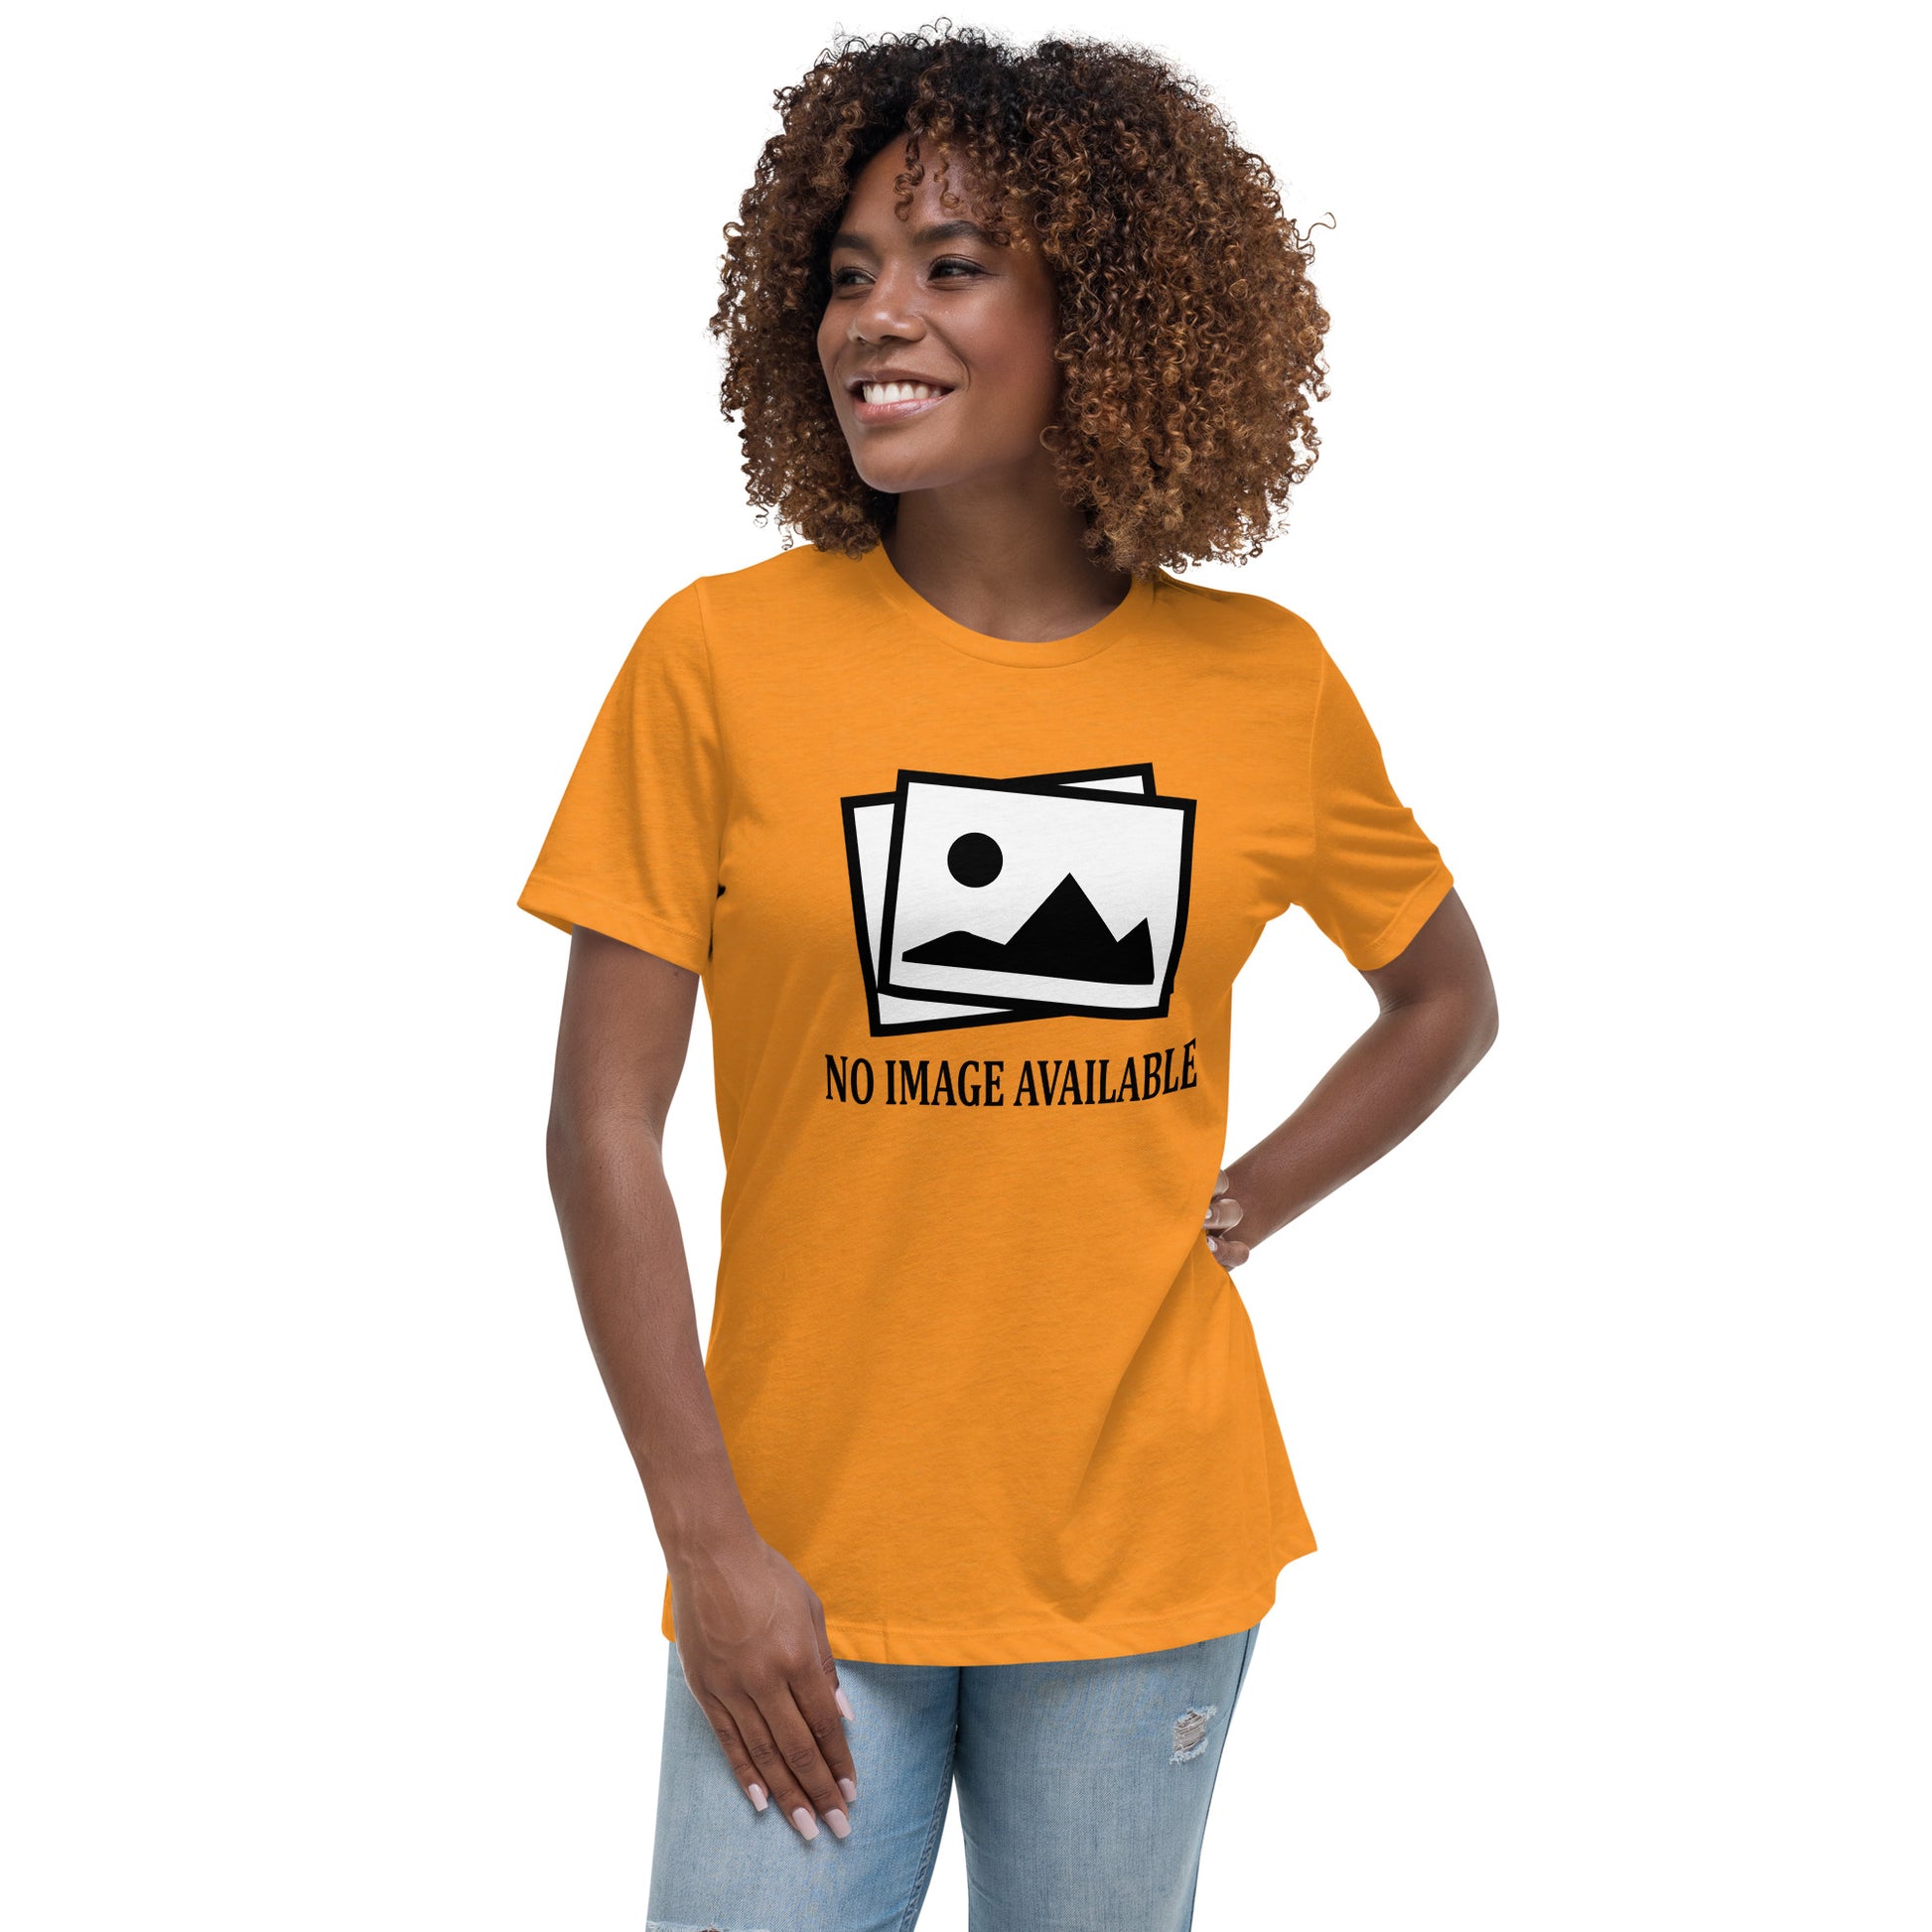 Women with marmalade  t-shirt with image and text "no image available"